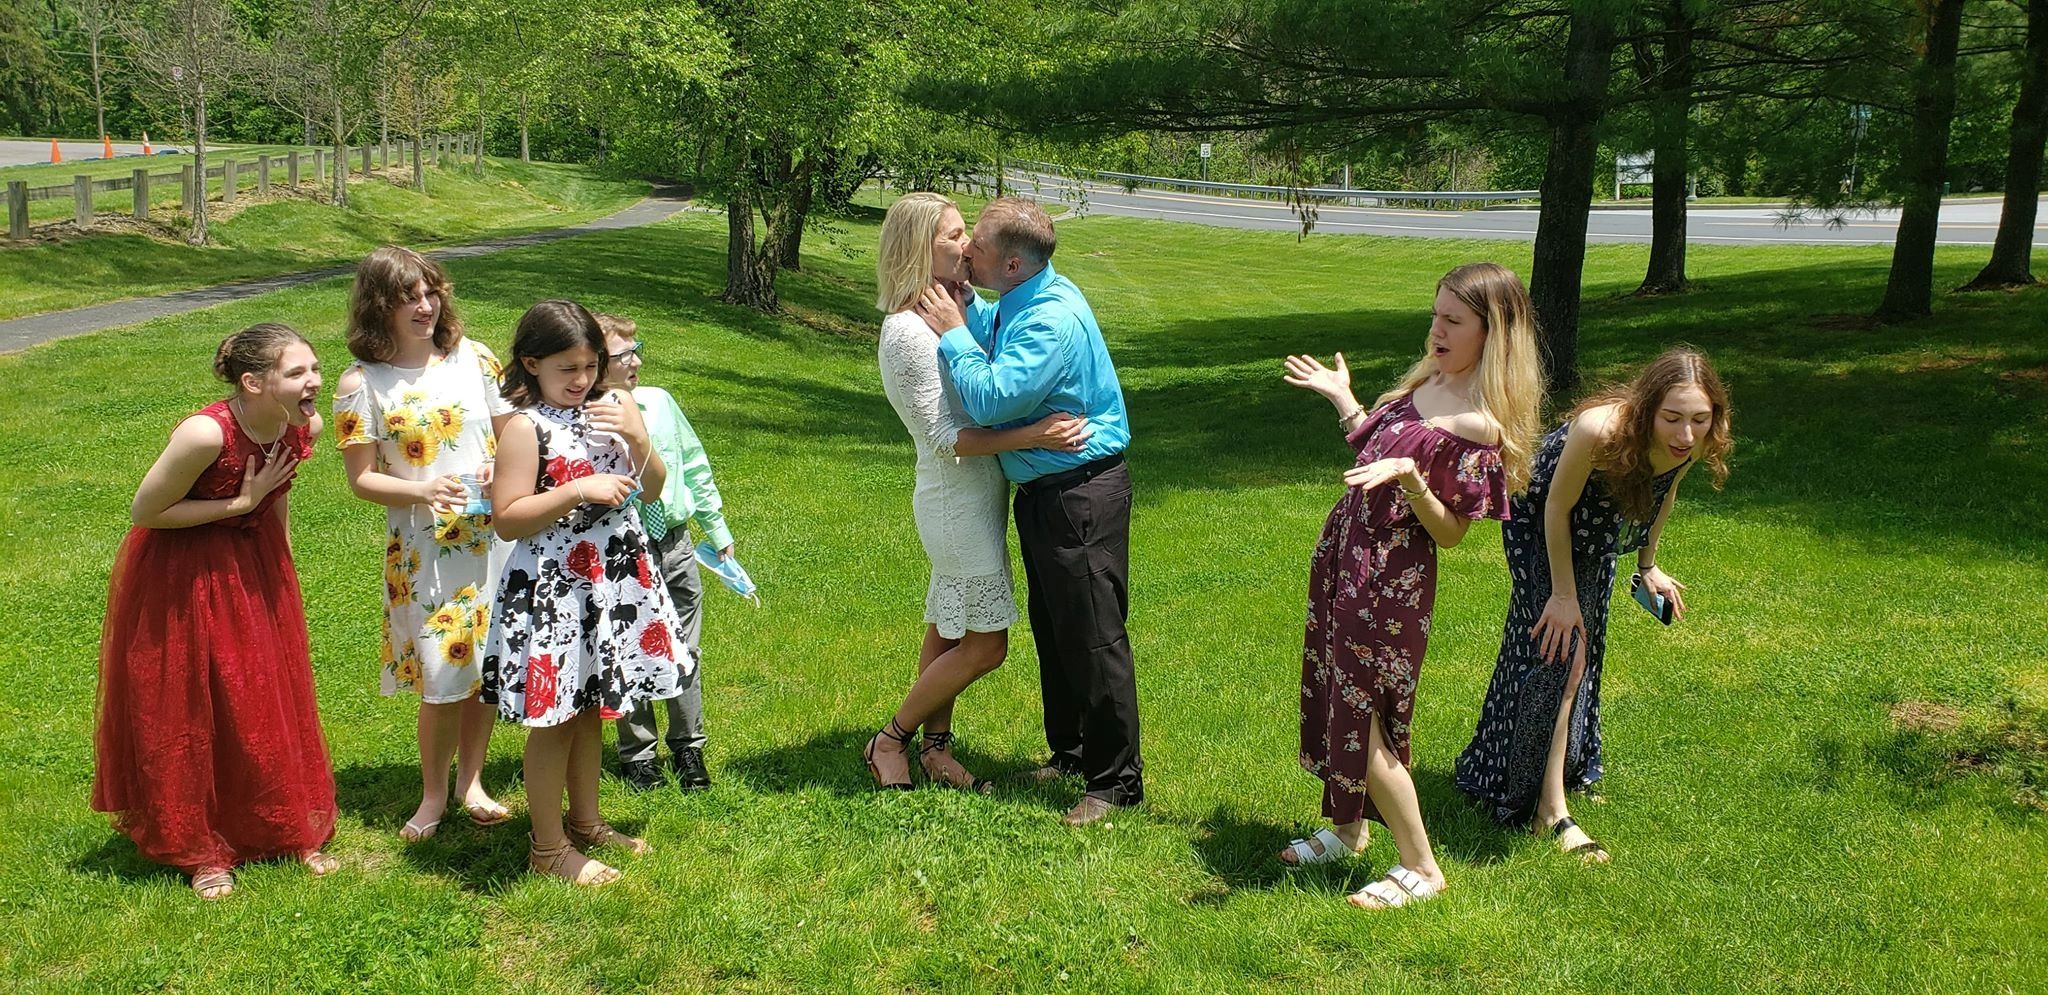 I'm not sure what the Brady Kids think of all this kissing!